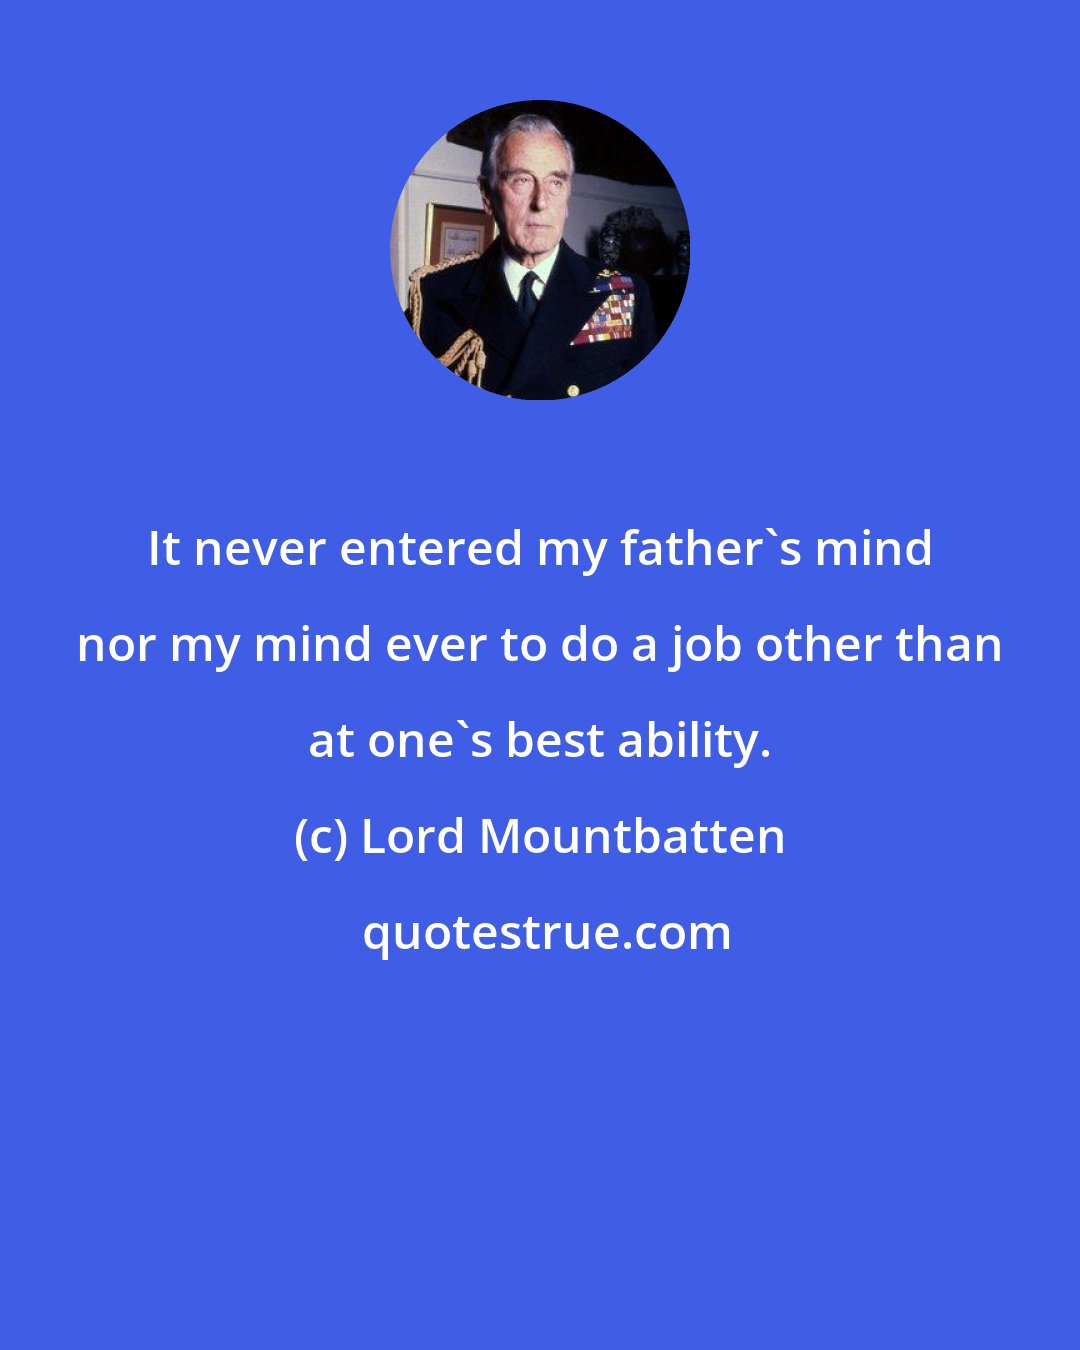 Lord Mountbatten: It never entered my father's mind nor my mind ever to do a job other than at one's best ability.